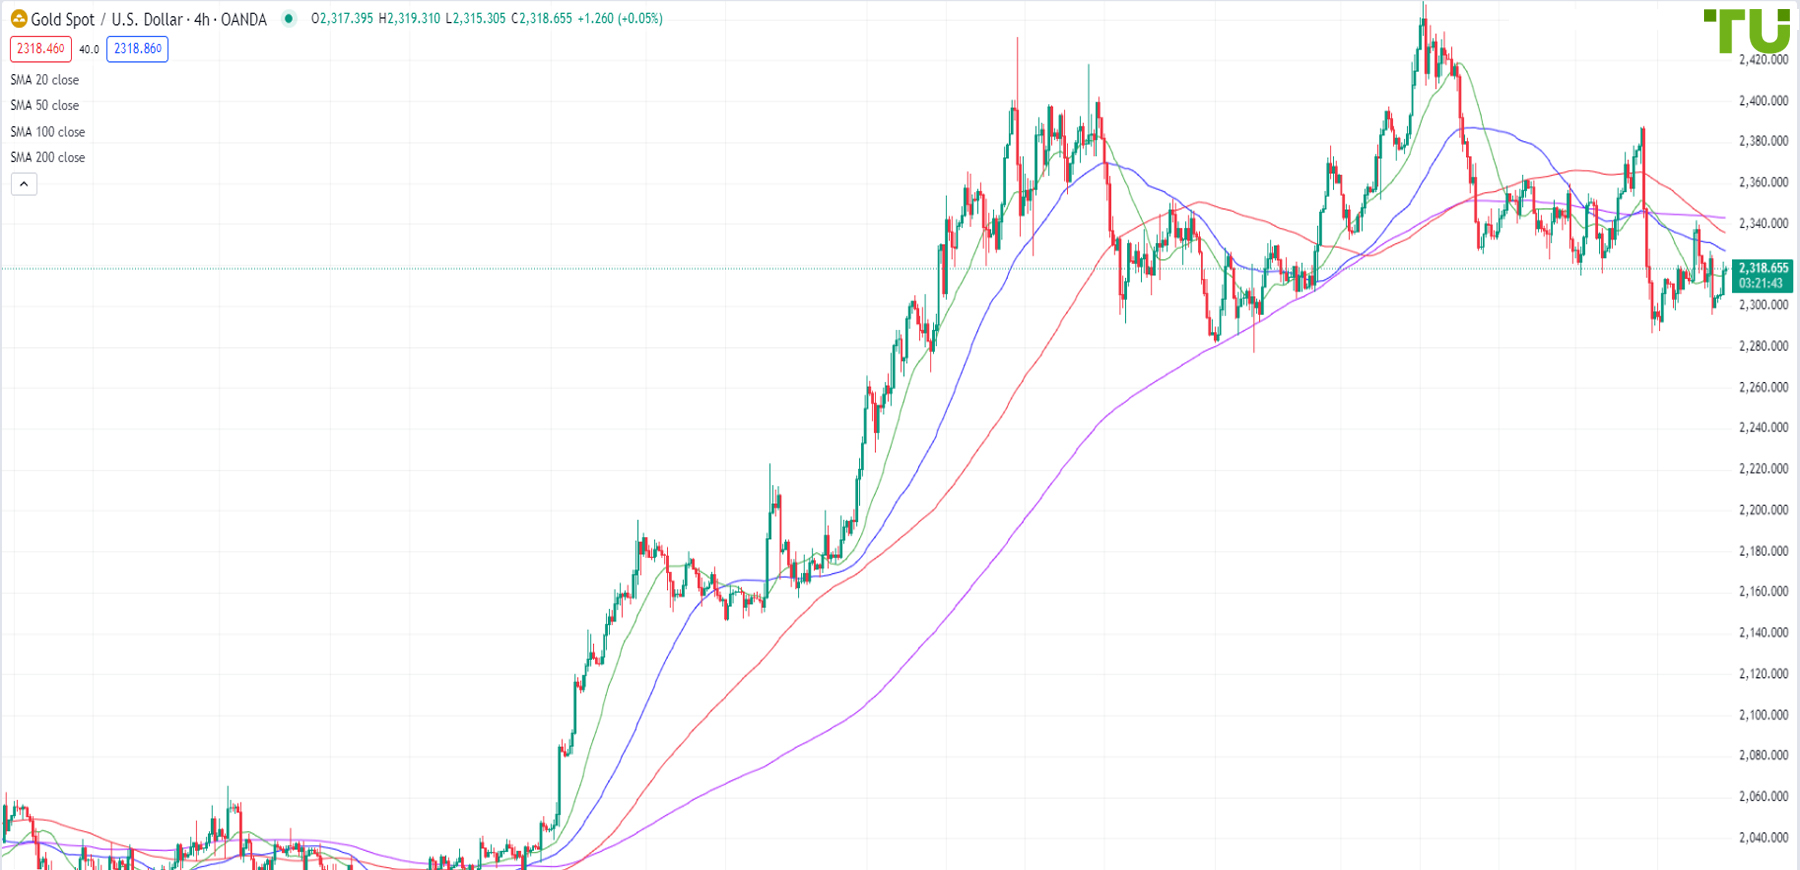 XAU/USD continues to consolidate in range